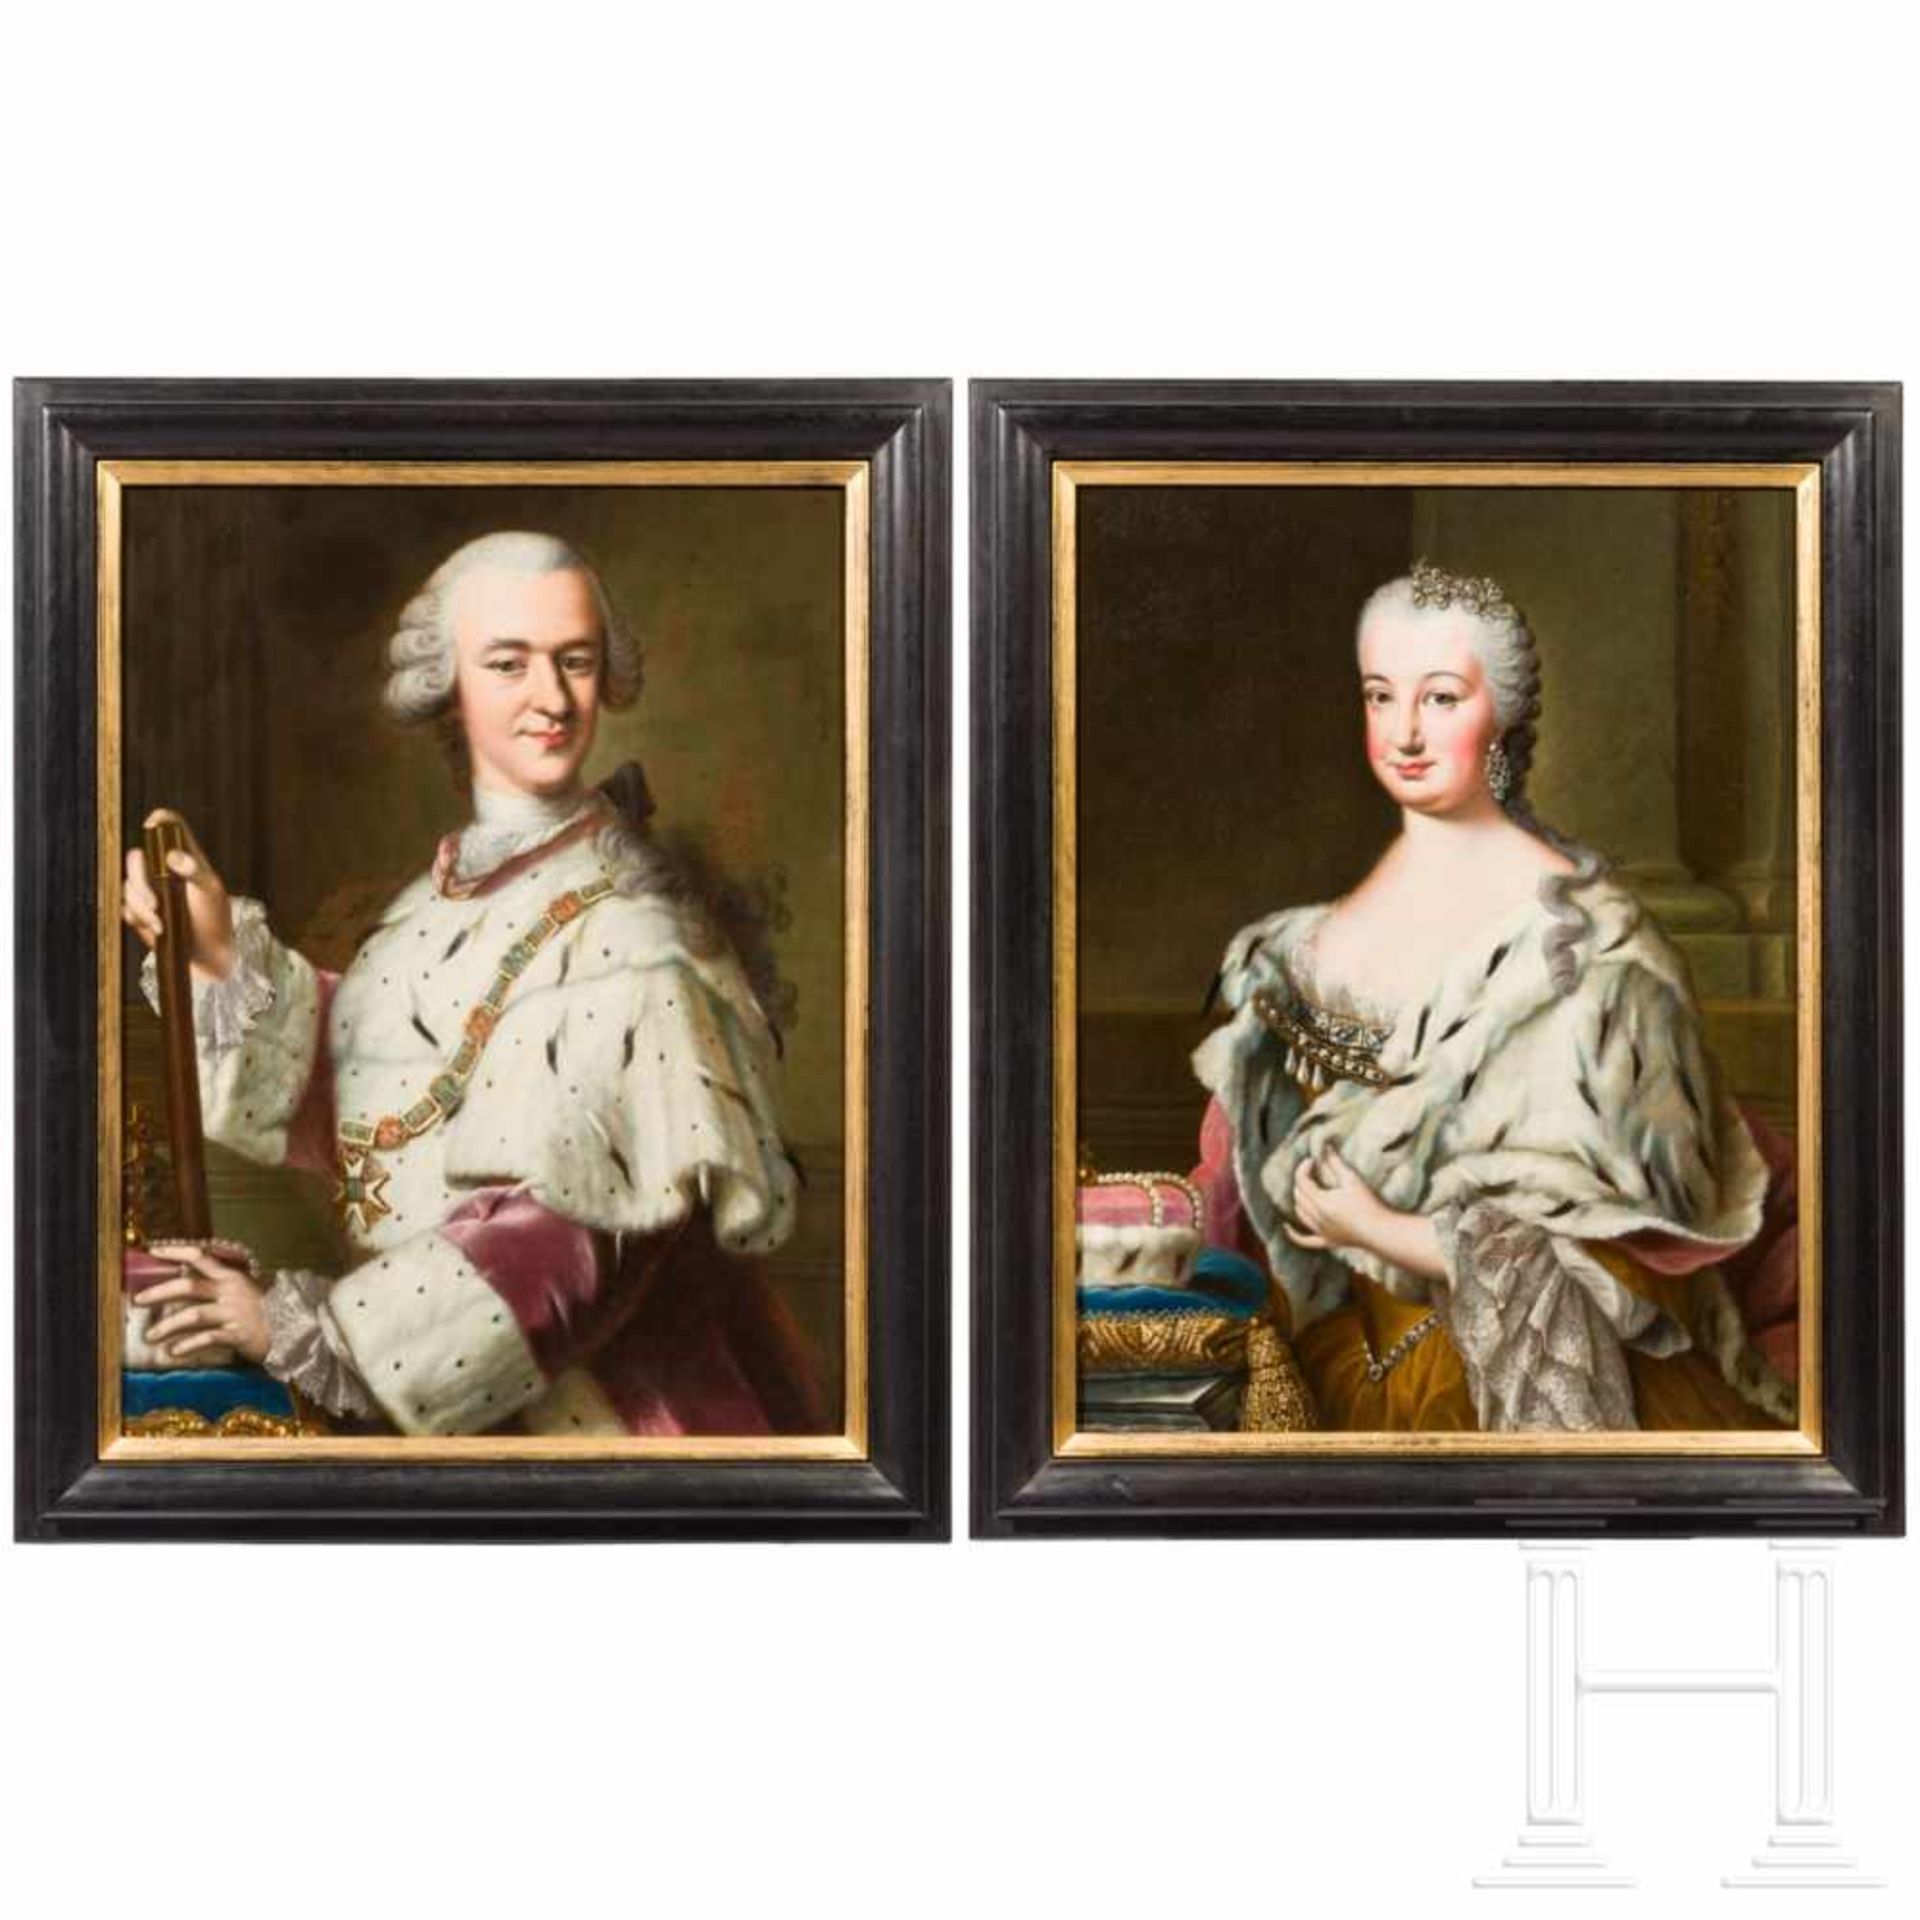 Charles Theodore, Elector of Bavaria (*1724 Drogenbusch near Brussels; †1799 Munich) and Countess